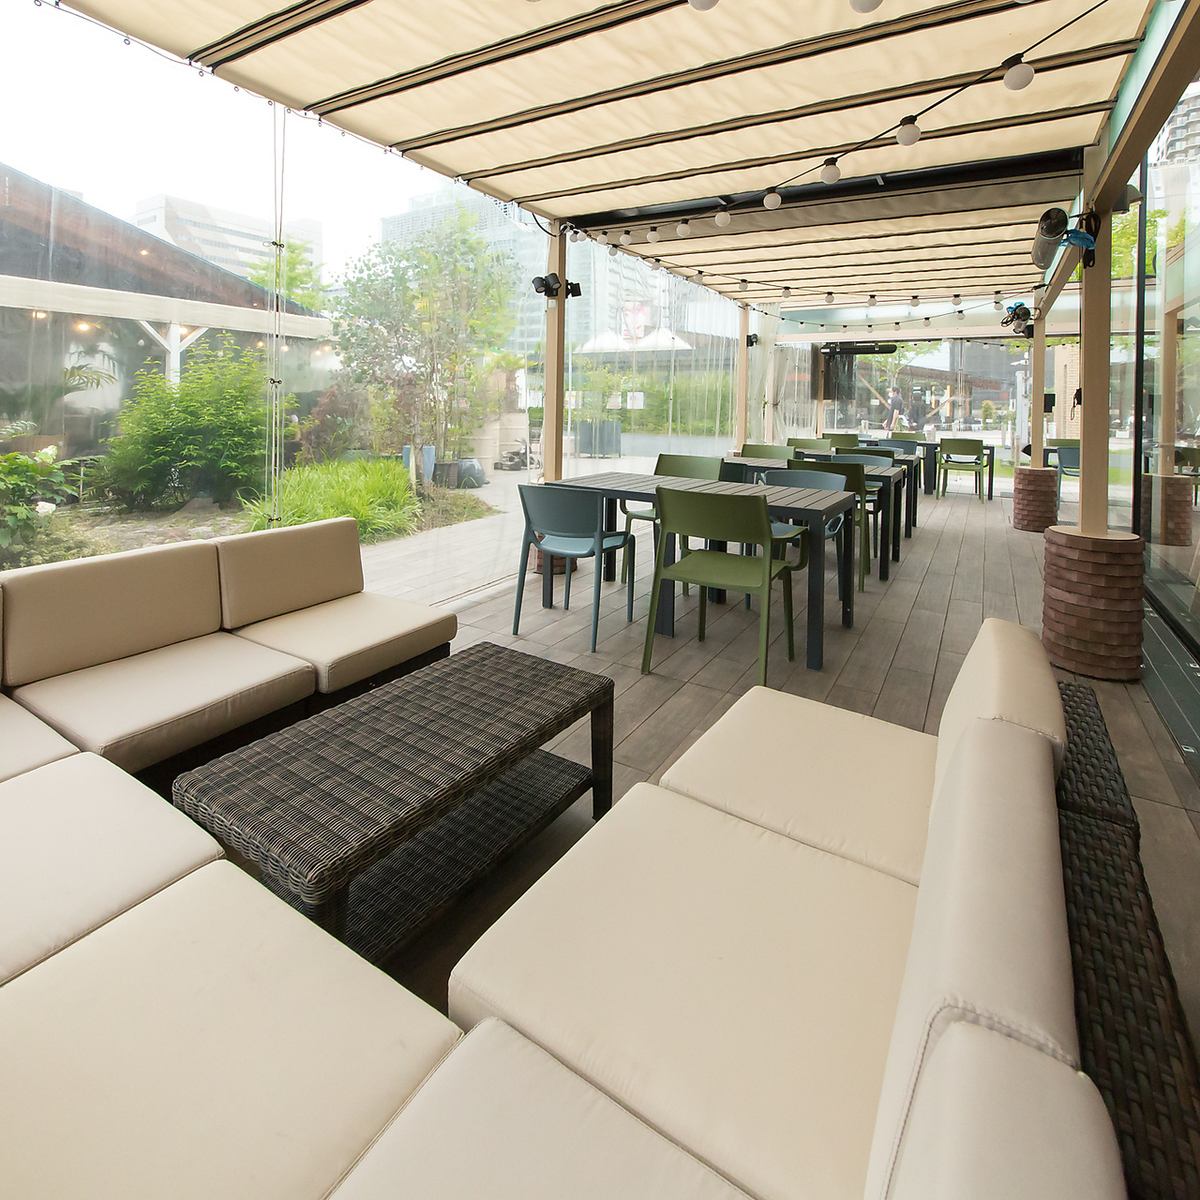 We have 30 seats on the terrace!